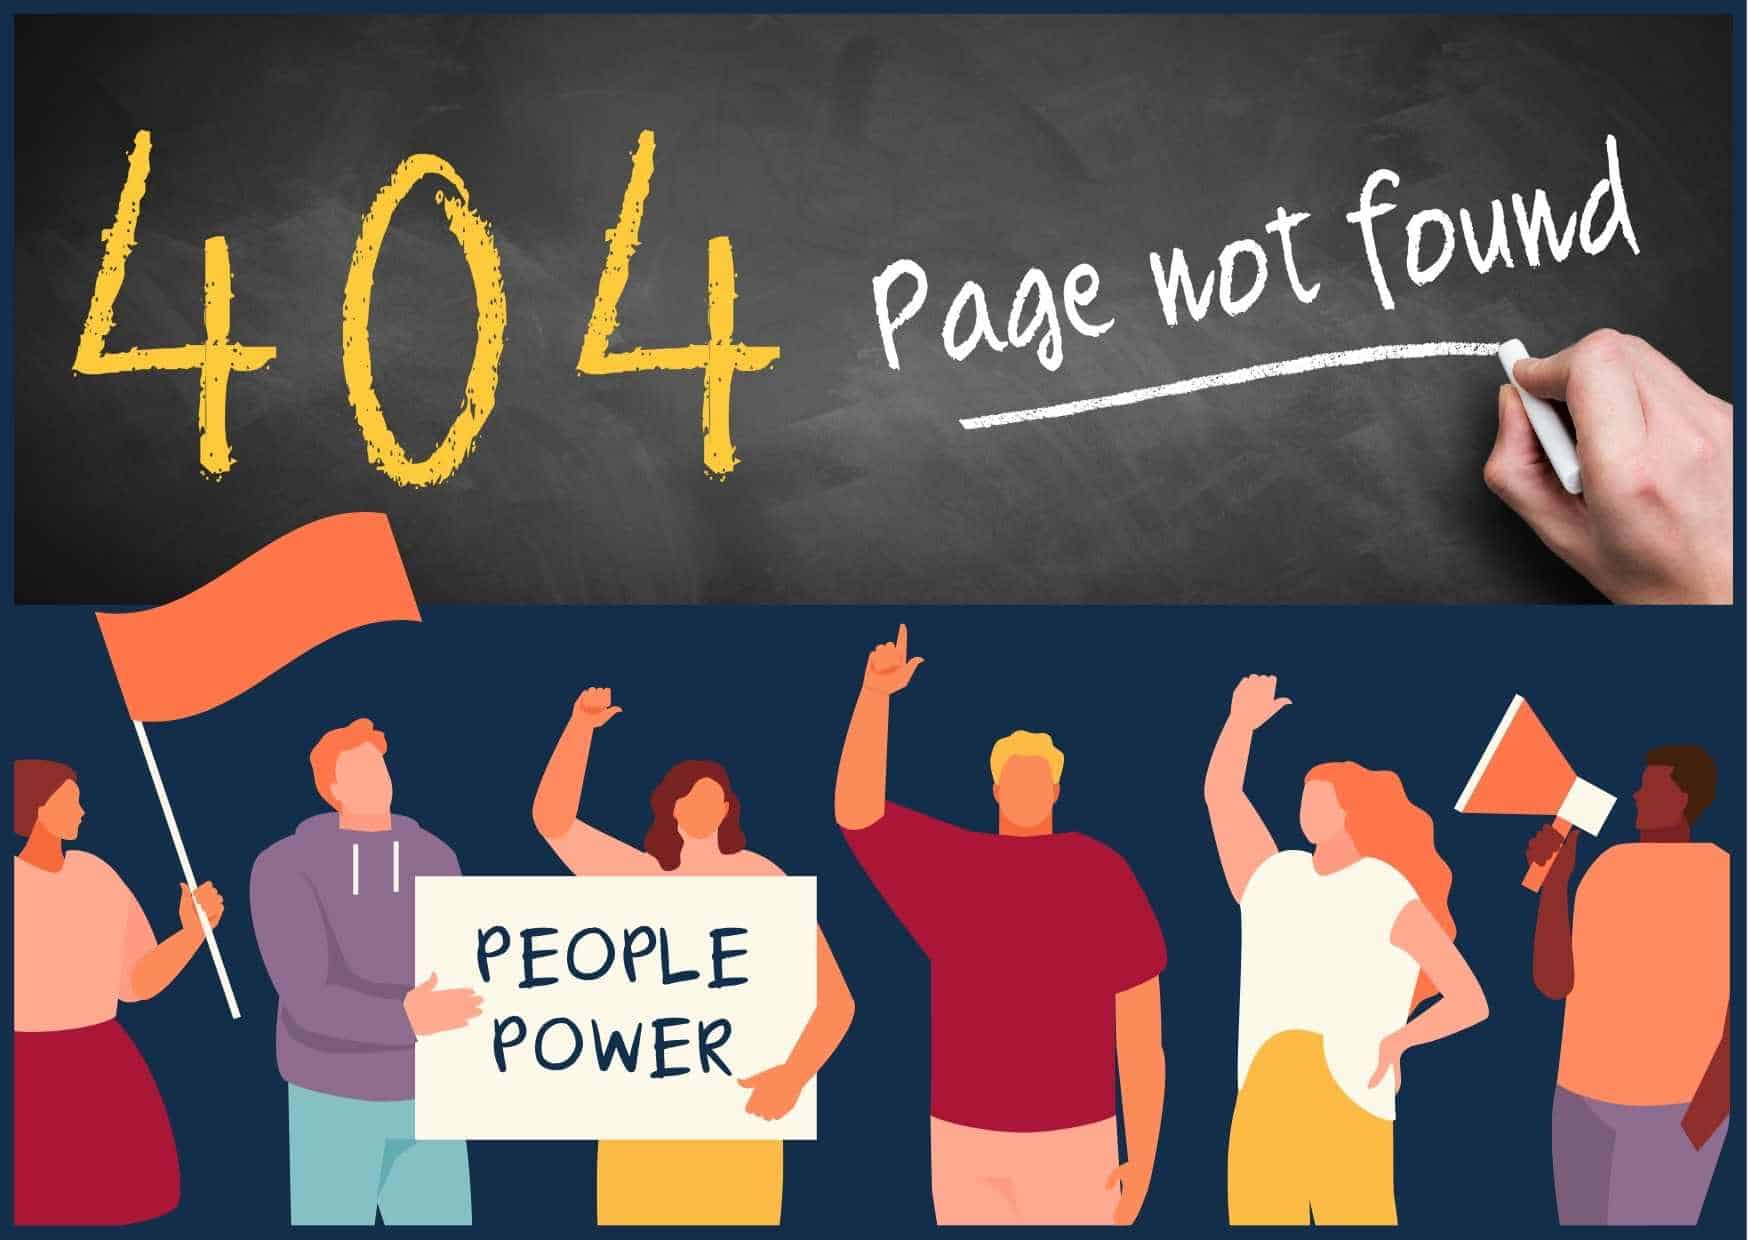 404 page not found message being written on a blackboard. A row of illustrated people are pointing up to the 404 message. They are holding up their hands in fists. One has a banner that reads People power, one has a loudspeaker and one is holding a banner.